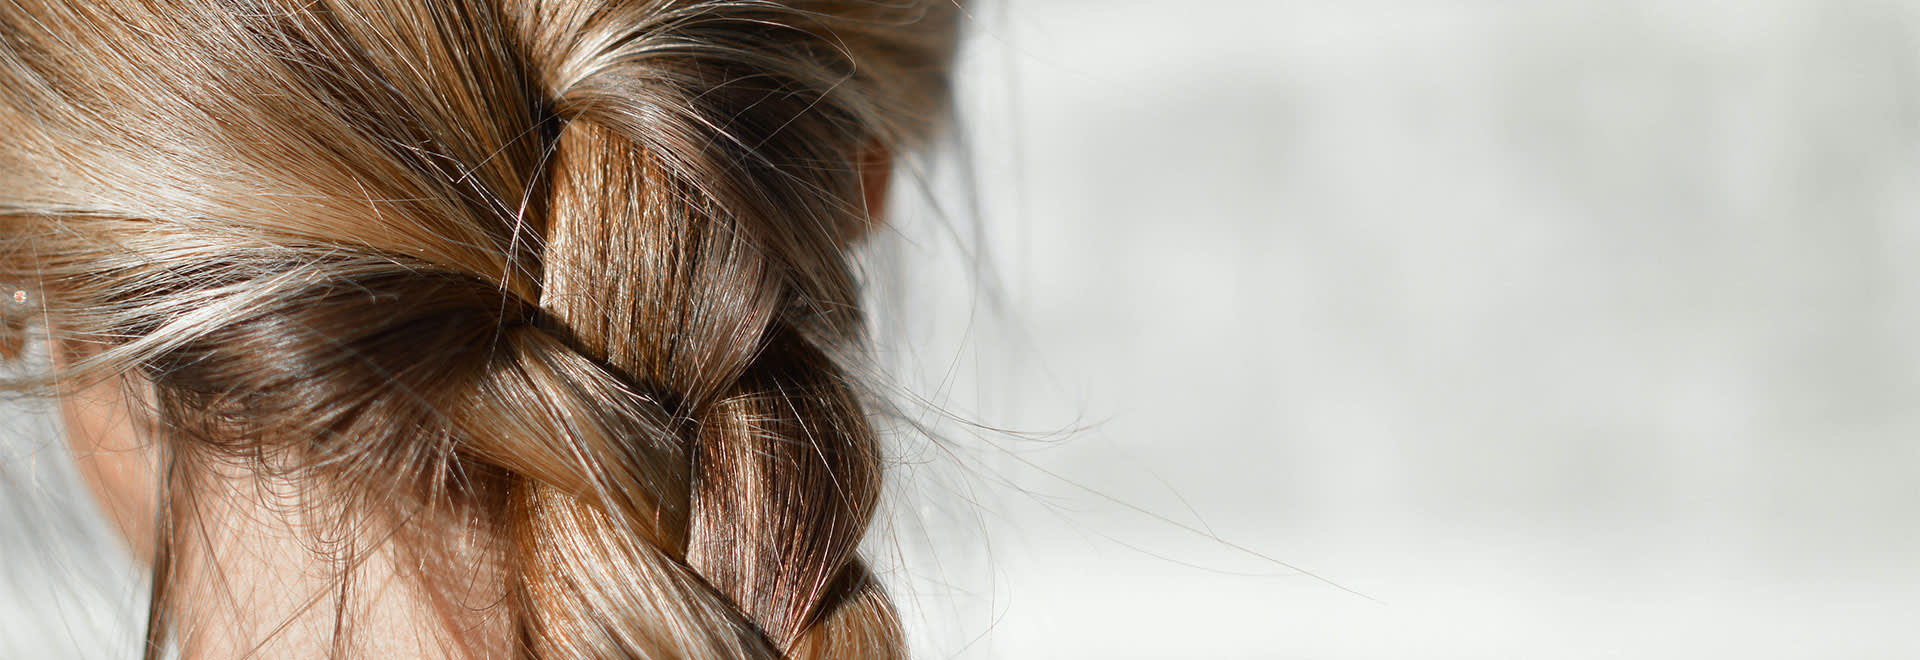 A close up on the braid of blonde hair